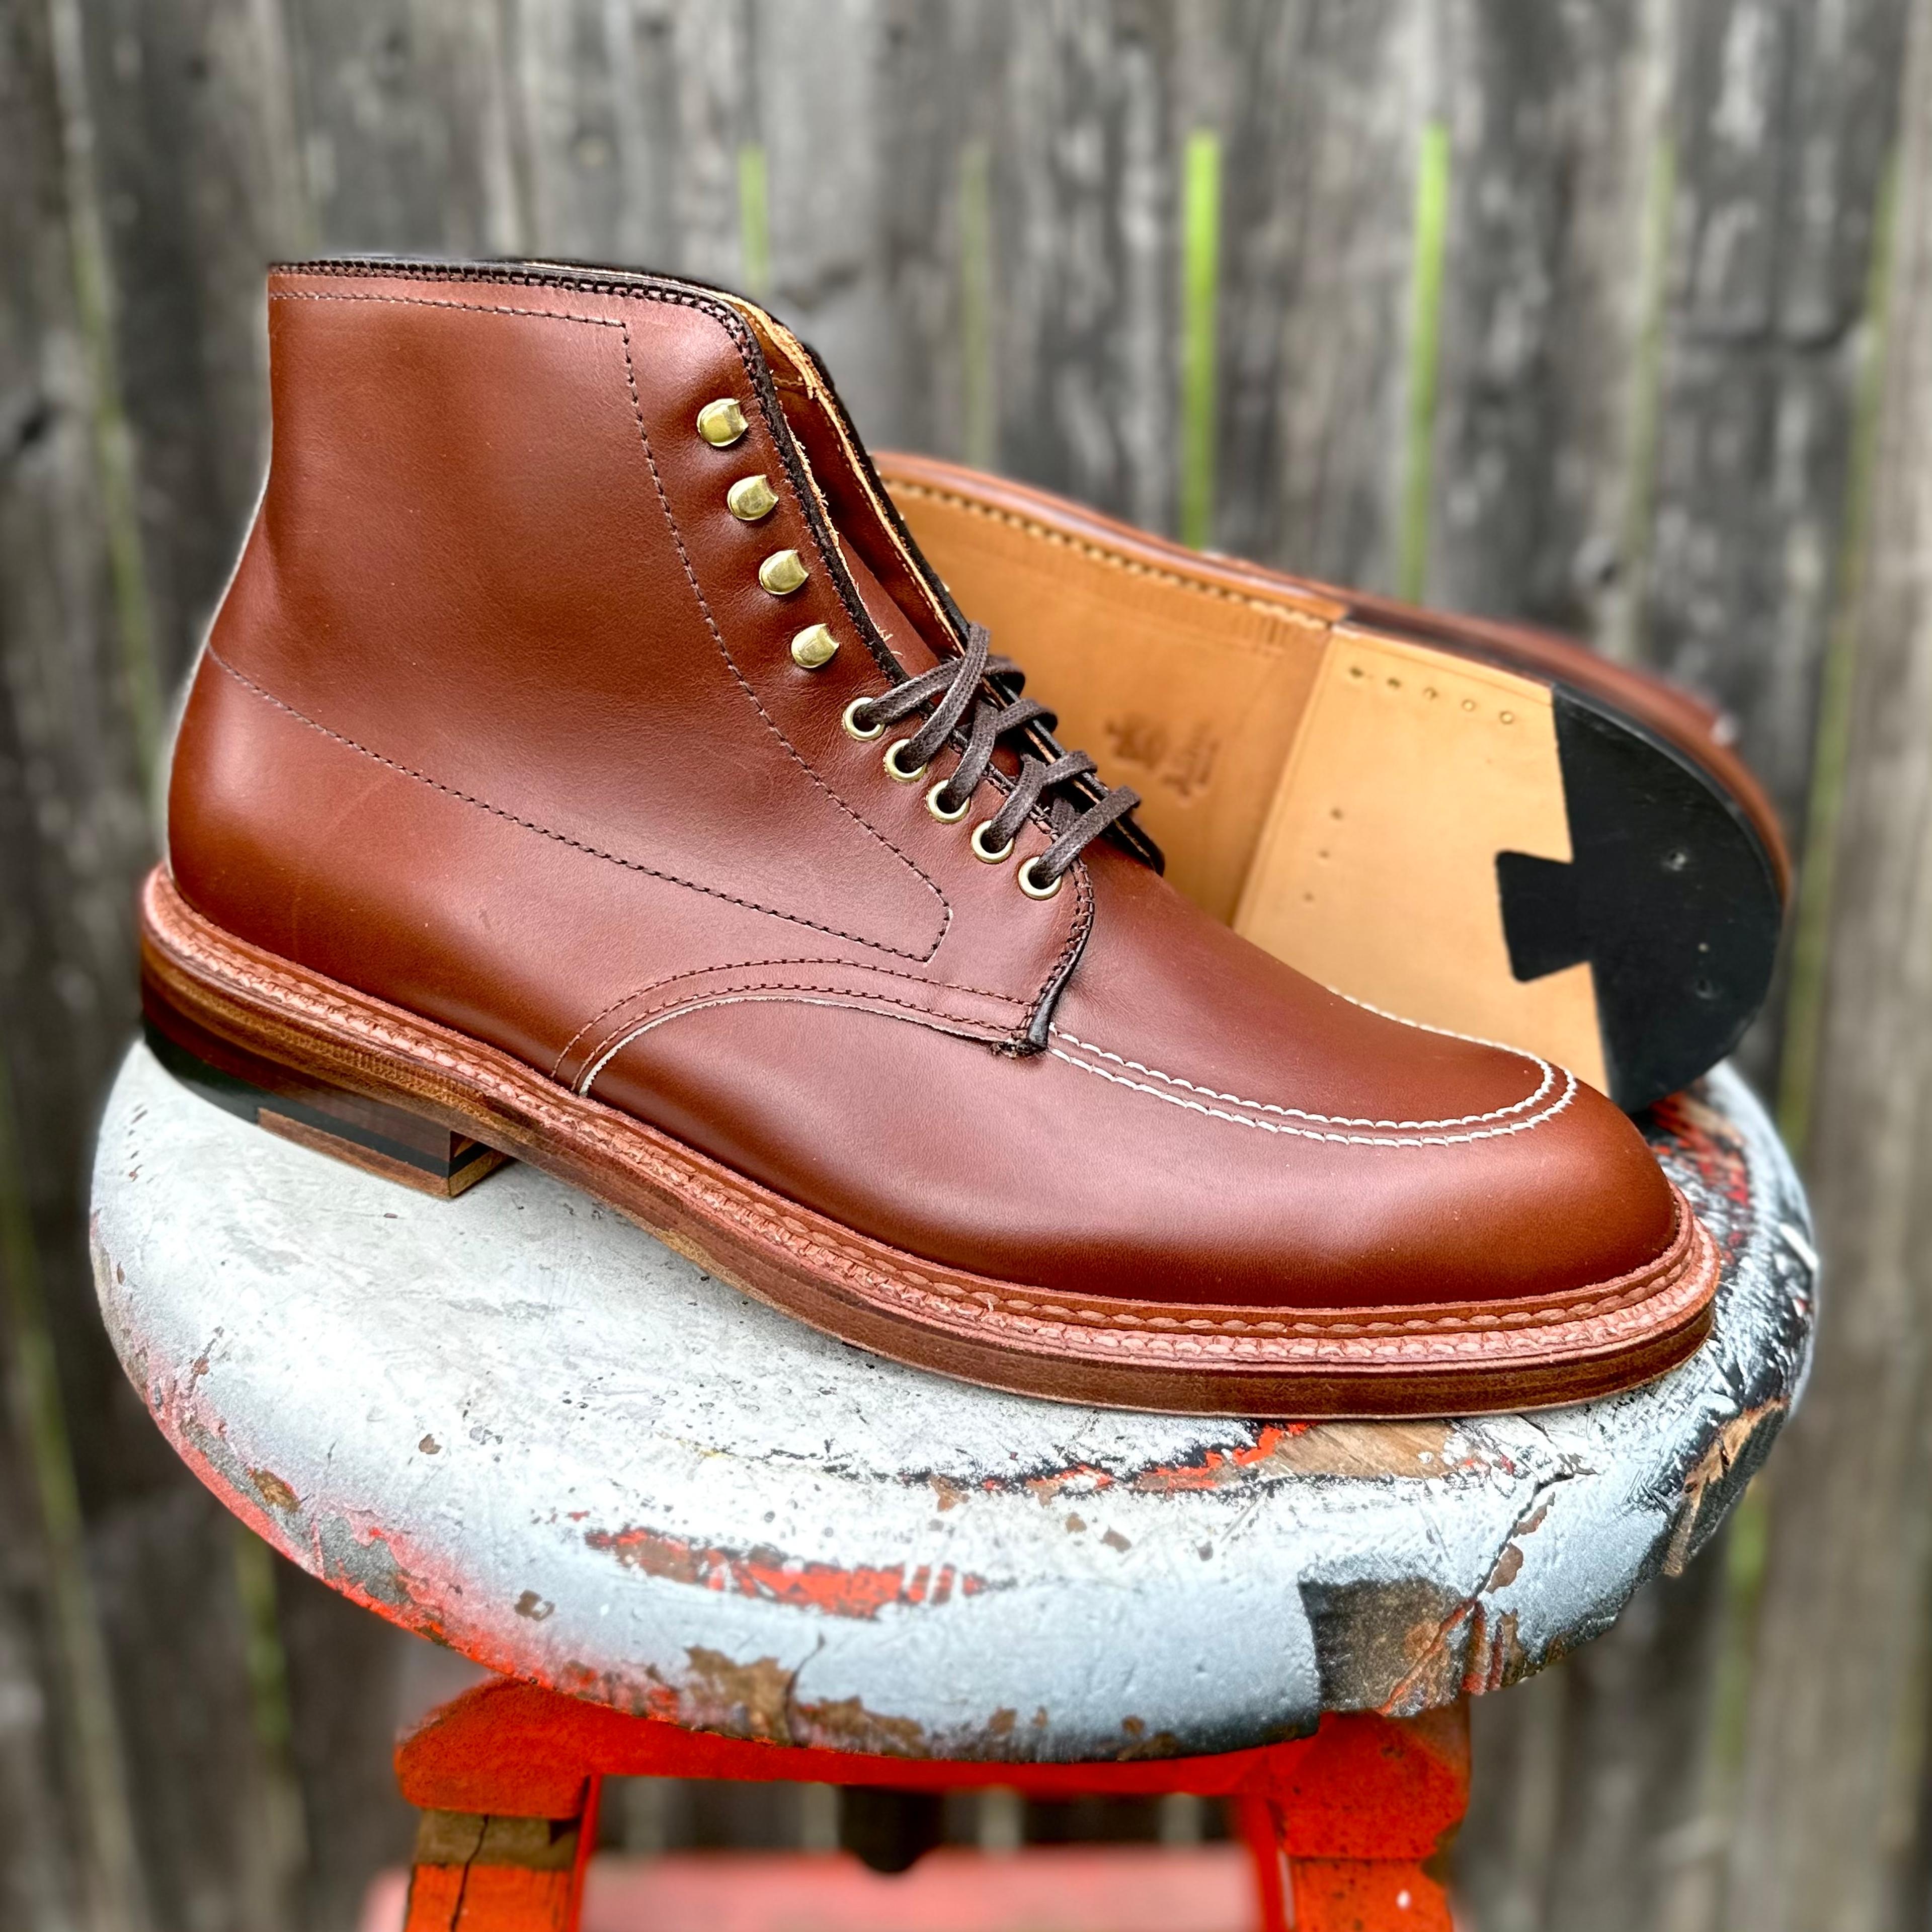 Madison IndyMadison Brown Indy Boot with Double Leather SoleD2940H | Alden Shoes Madison Avenue New York